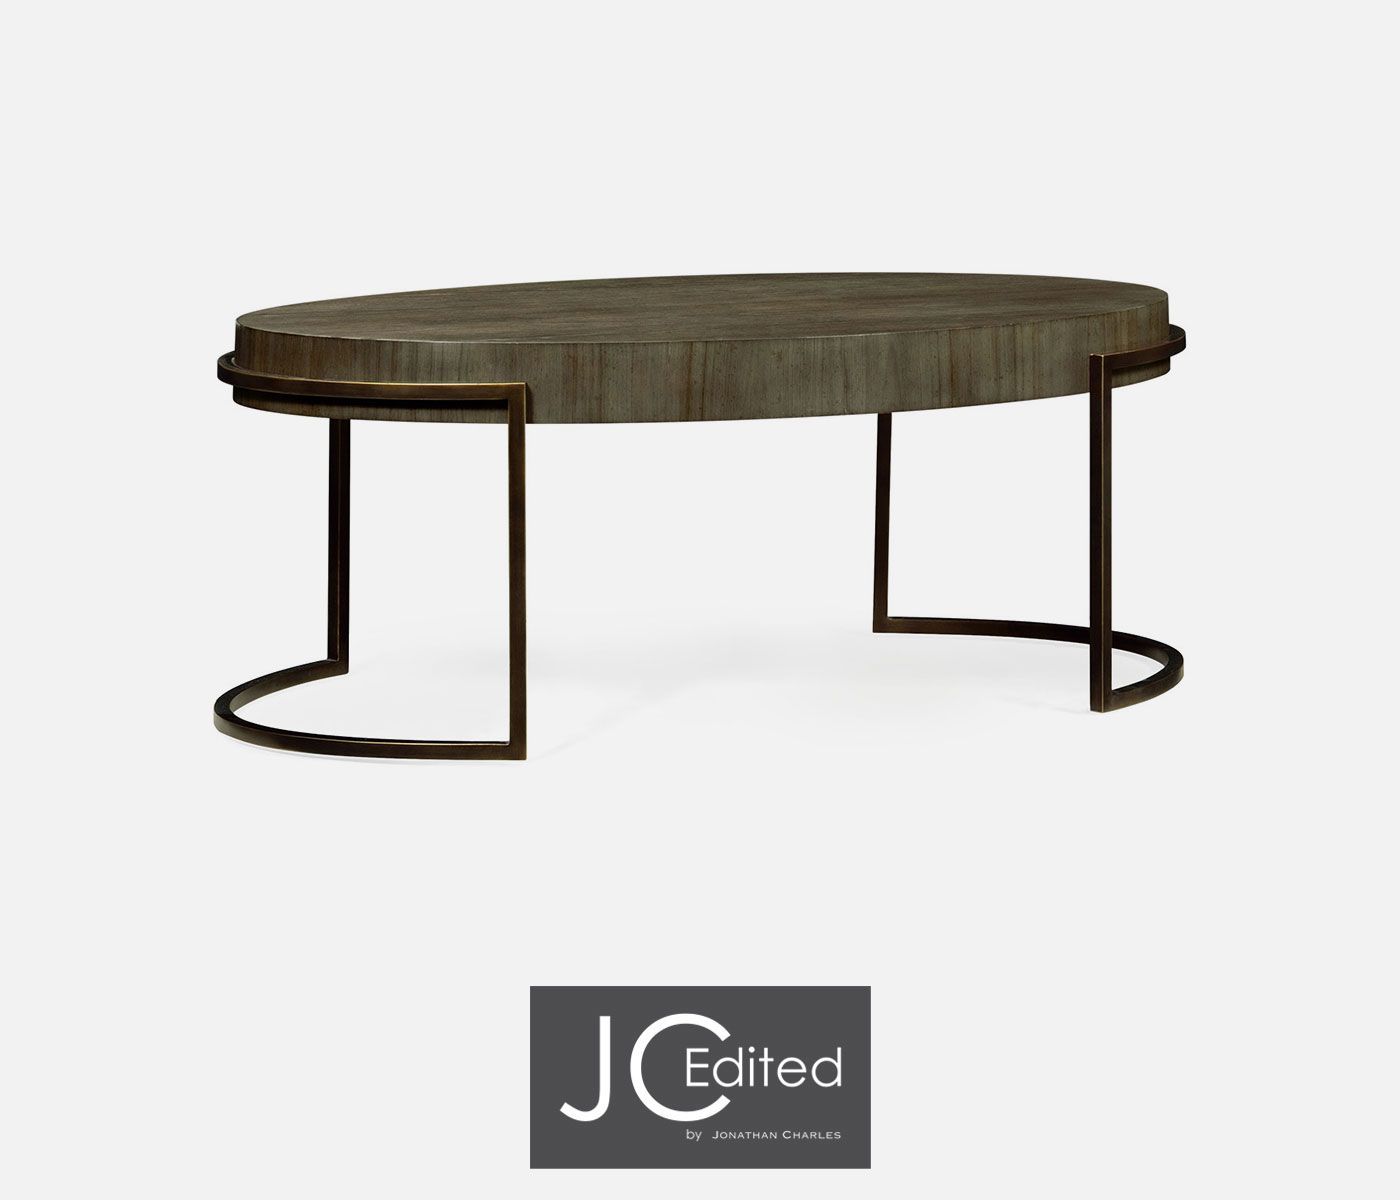 Light Bronze Iron Oval Coffee Table In Chestnut | Coffee Table, Oval In Oval Aged Black Iron Console Tables (View 6 of 20)